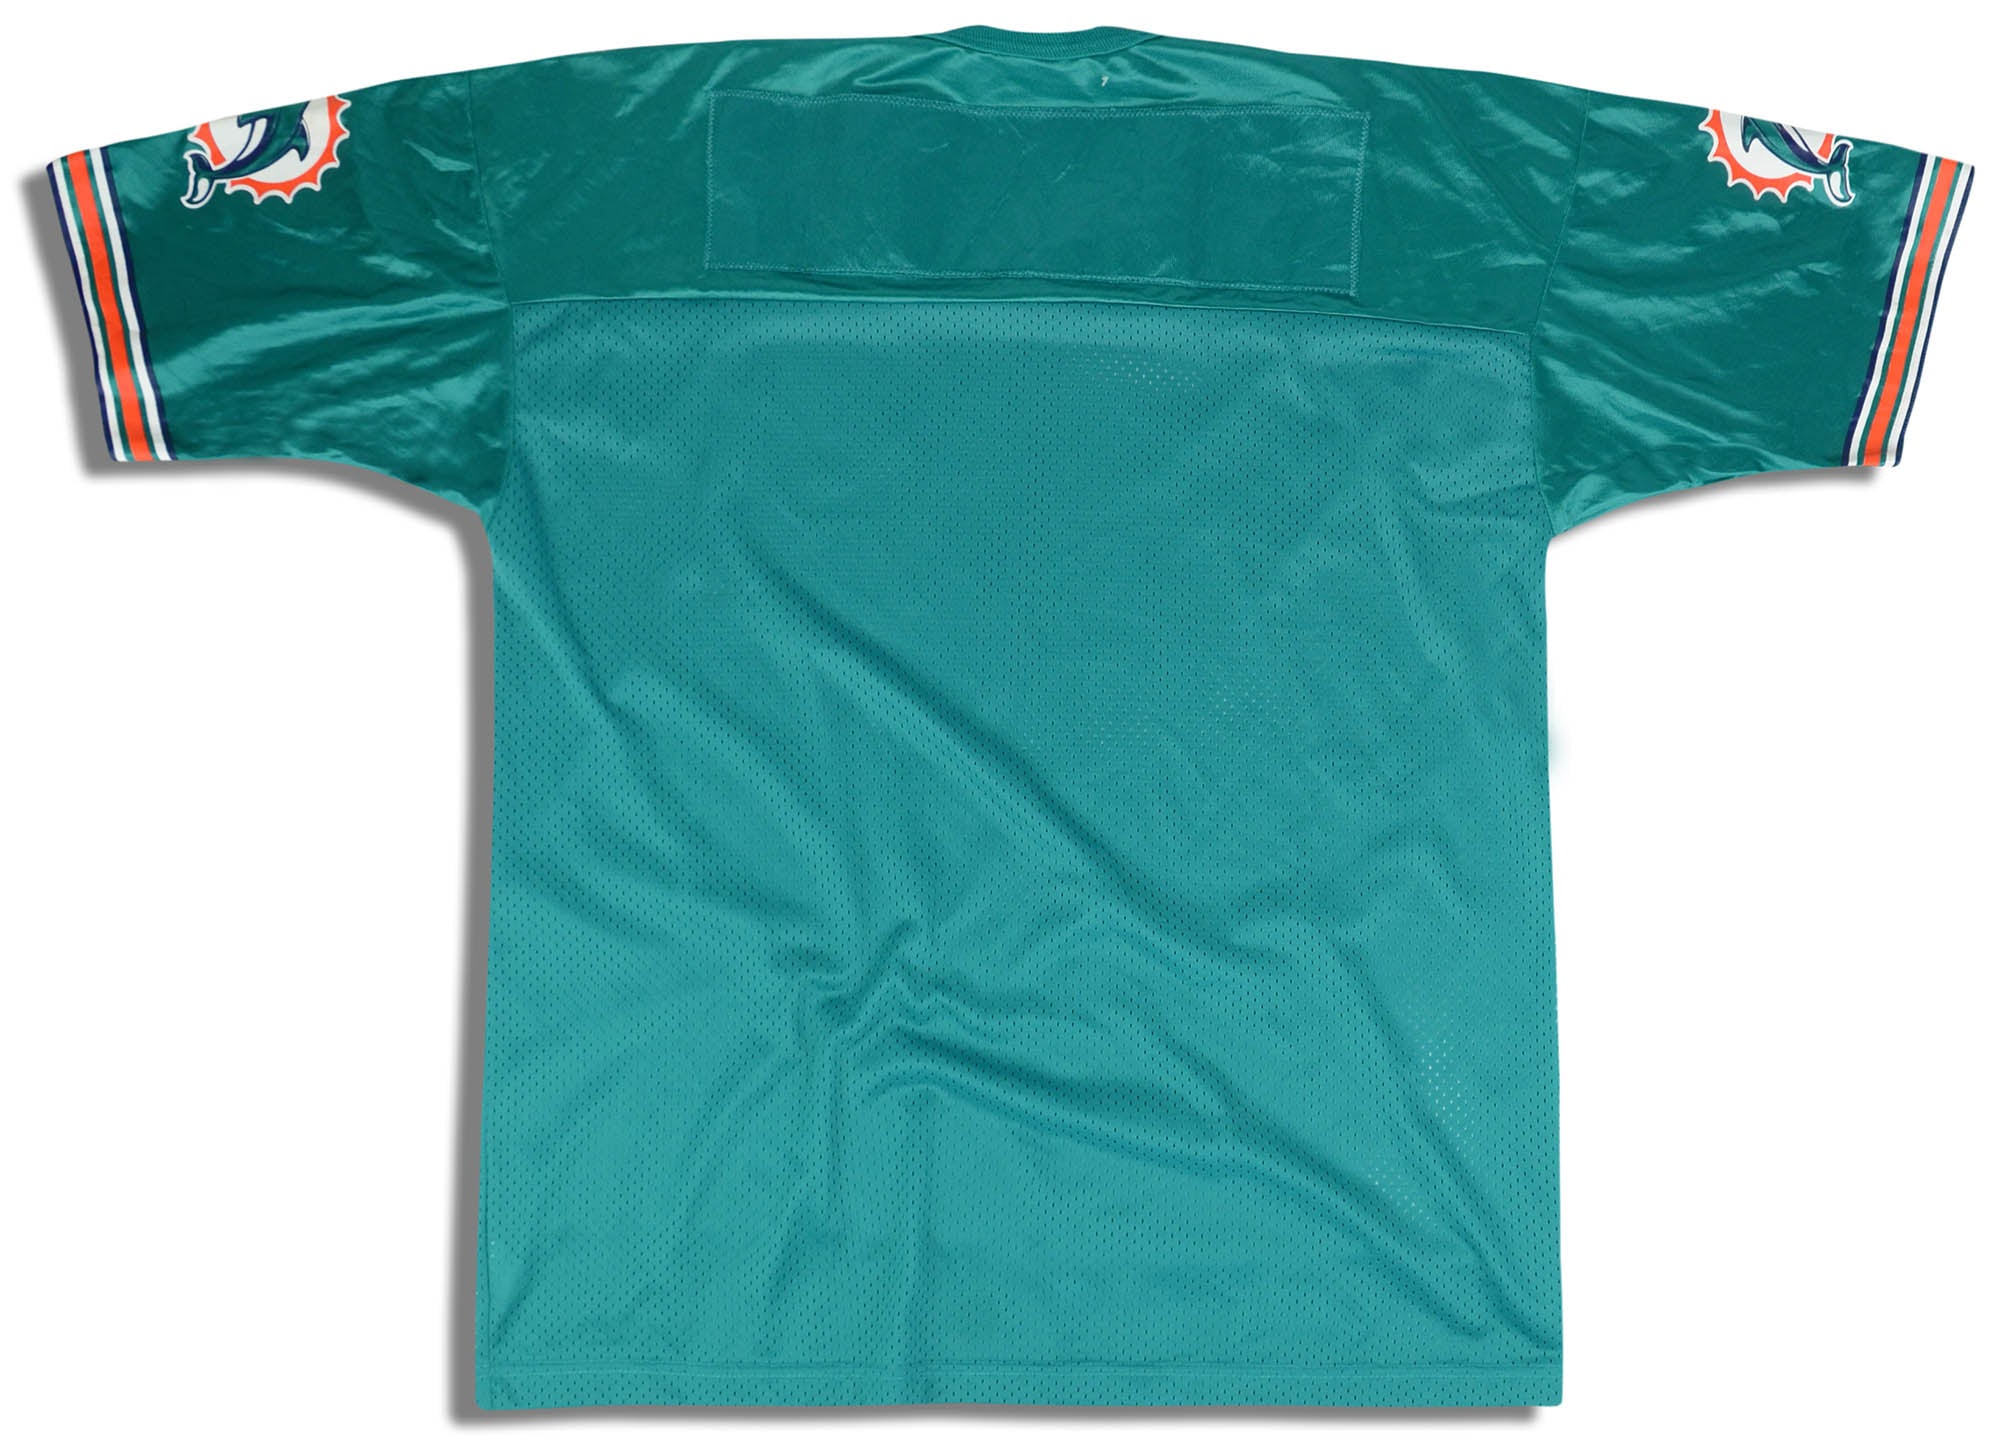 1997-00 MIAMI DOLPHINS CHAMPION JERSEY (HOME) XL